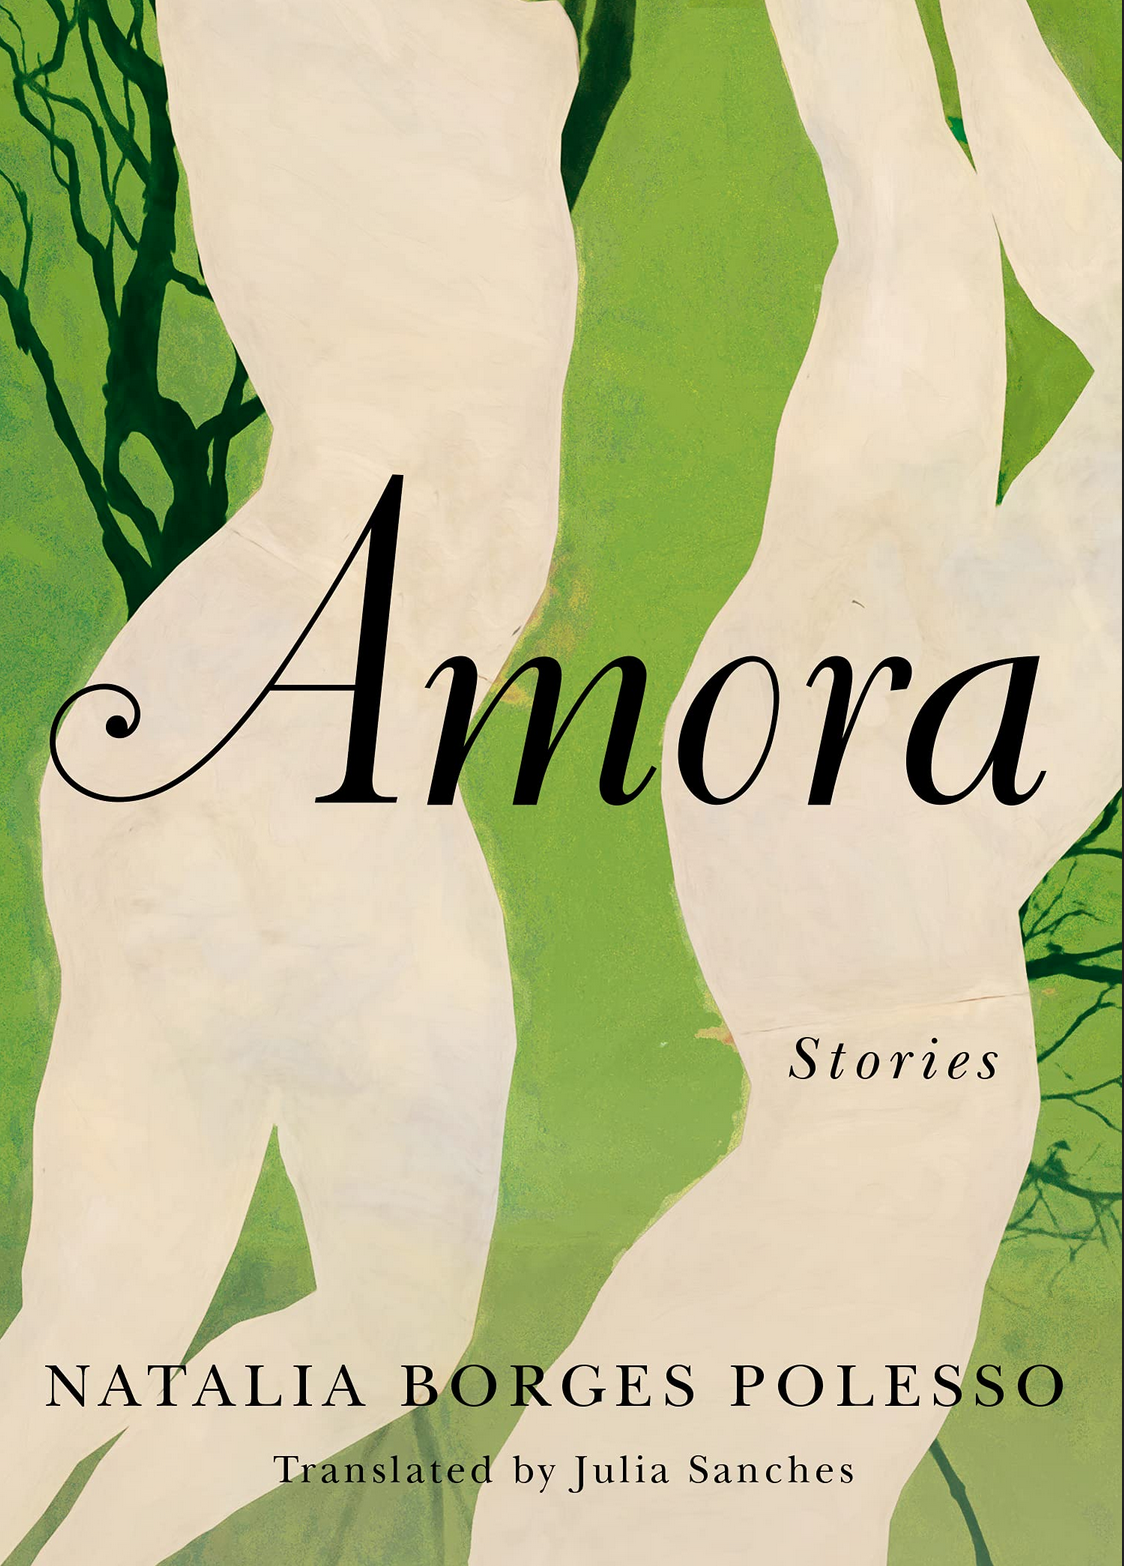 Amora book cover; green background with two white silhouettes over it